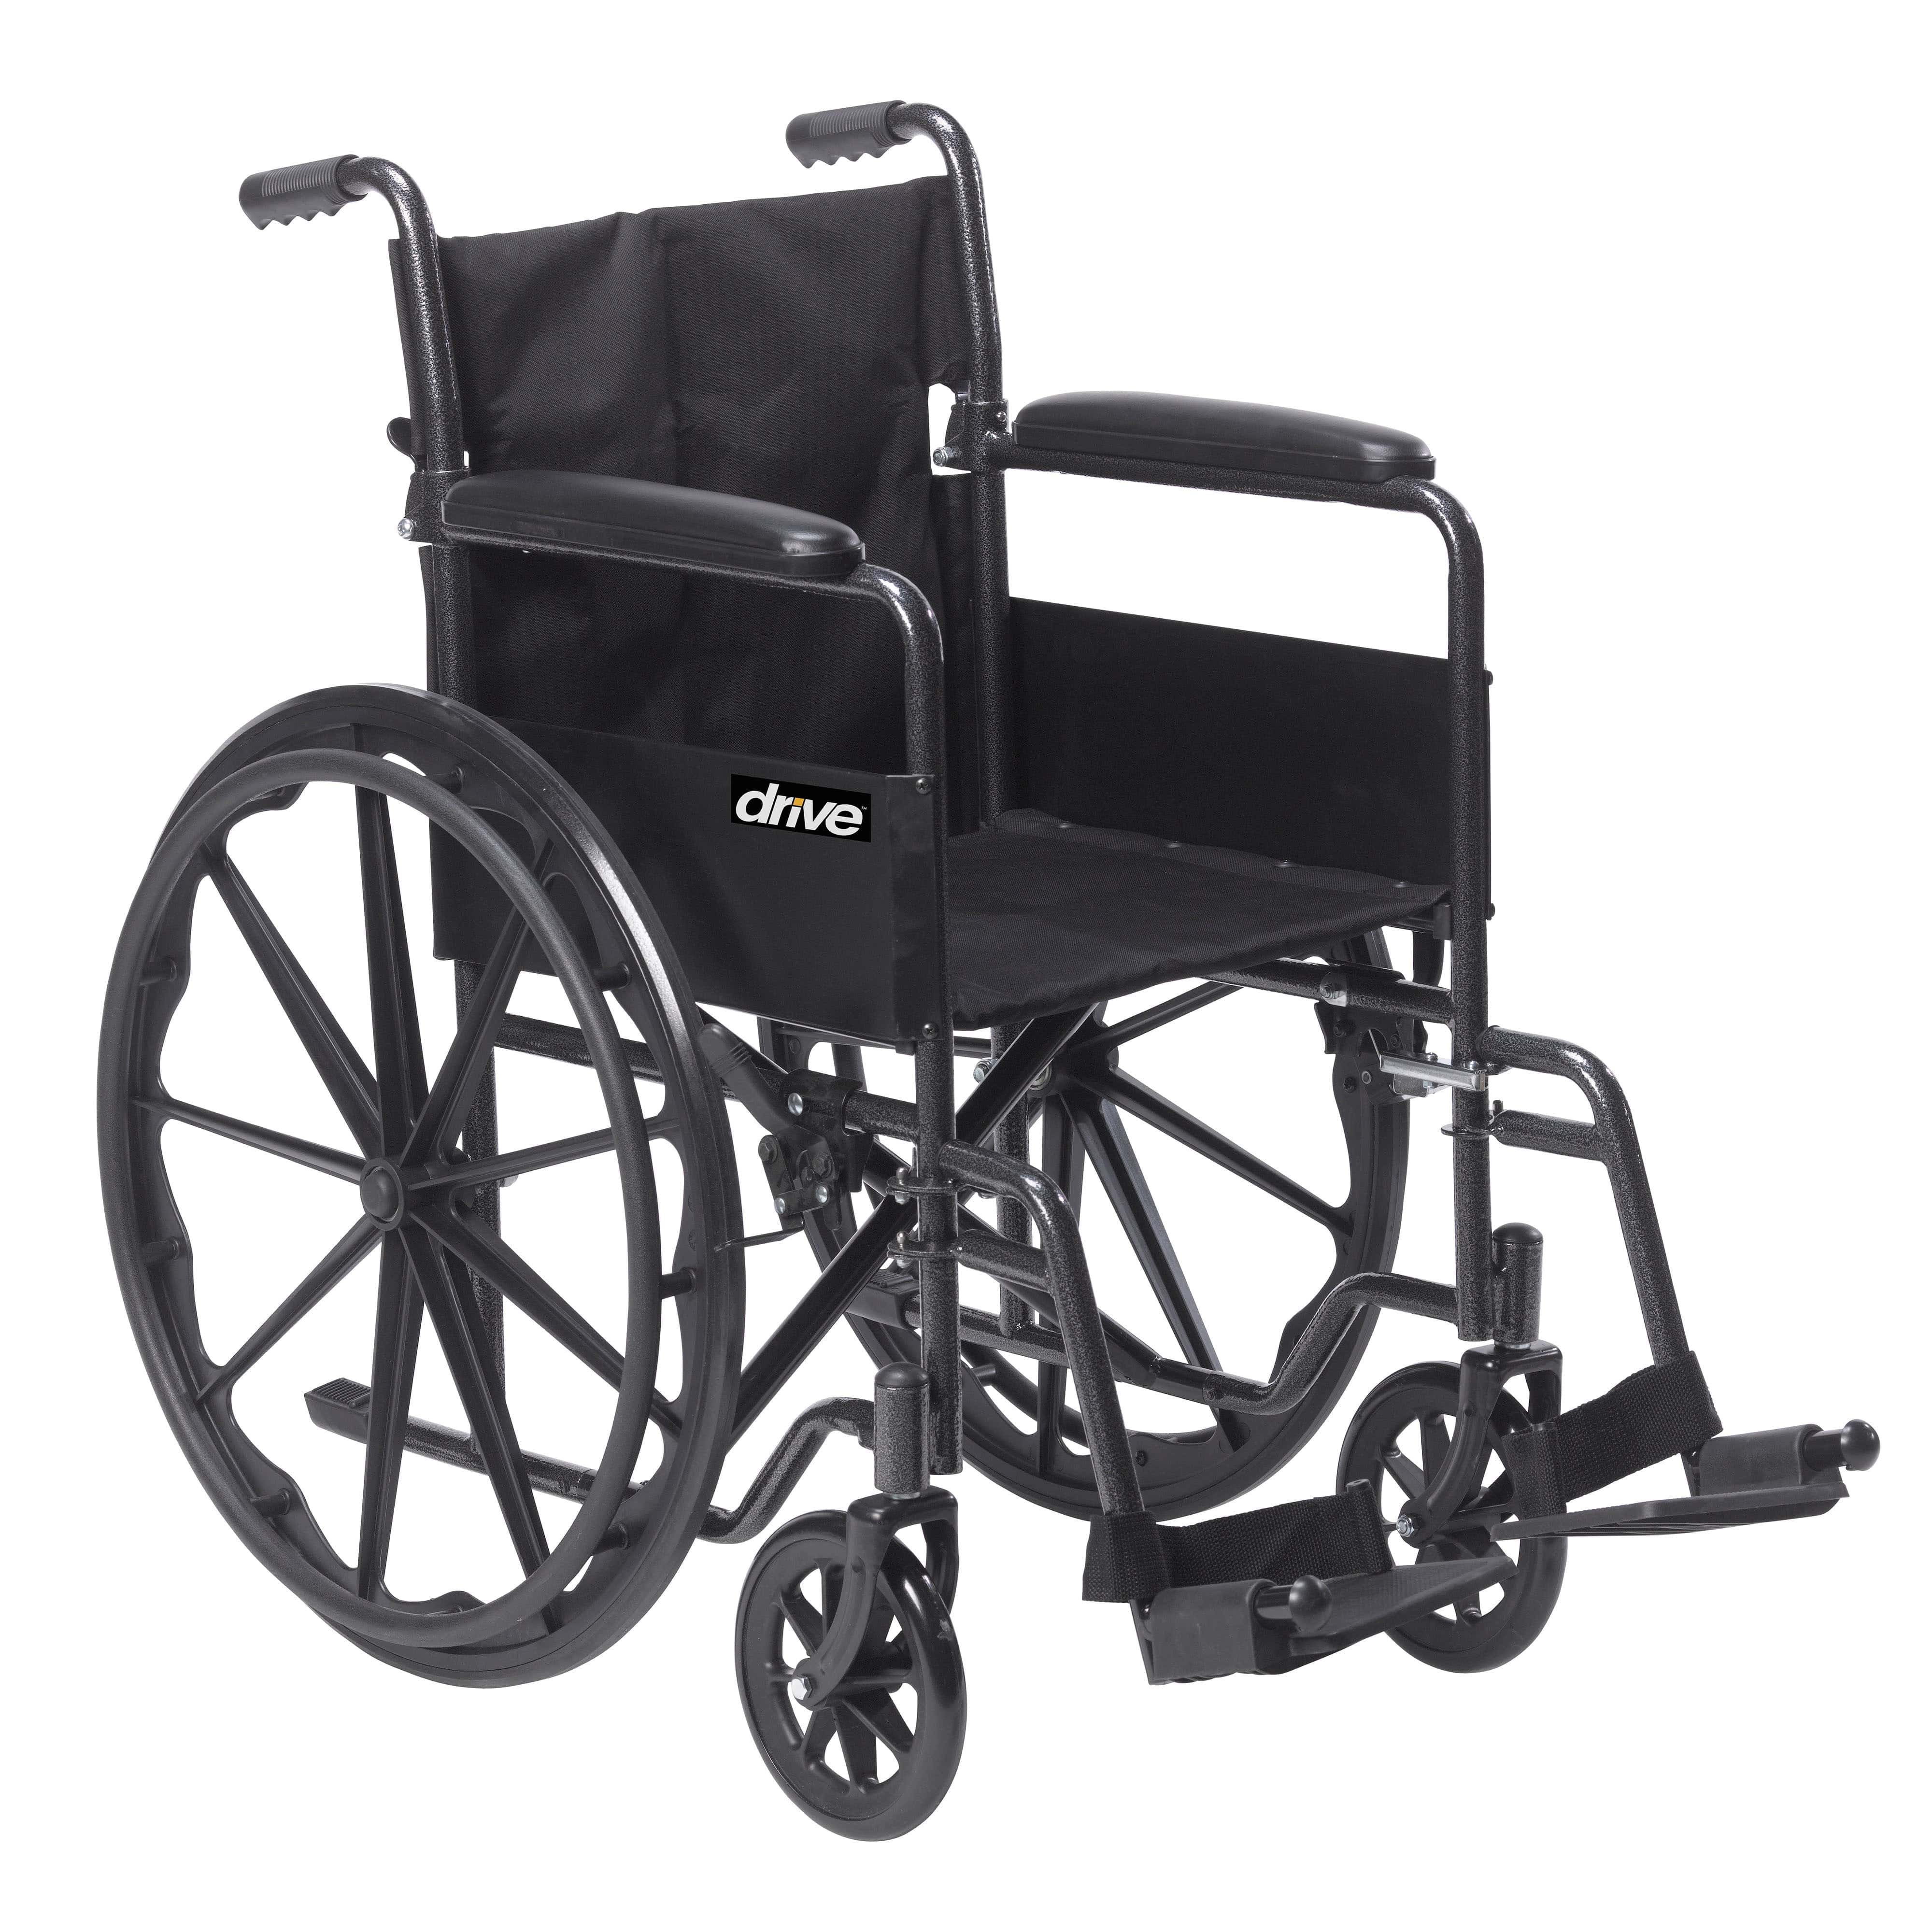 Drive Medical Wheelchairs/Standard Wheelchairs Drive Medical Silver Sport 1 Wheelchair with Full Arms and Swing away Removable Footrest